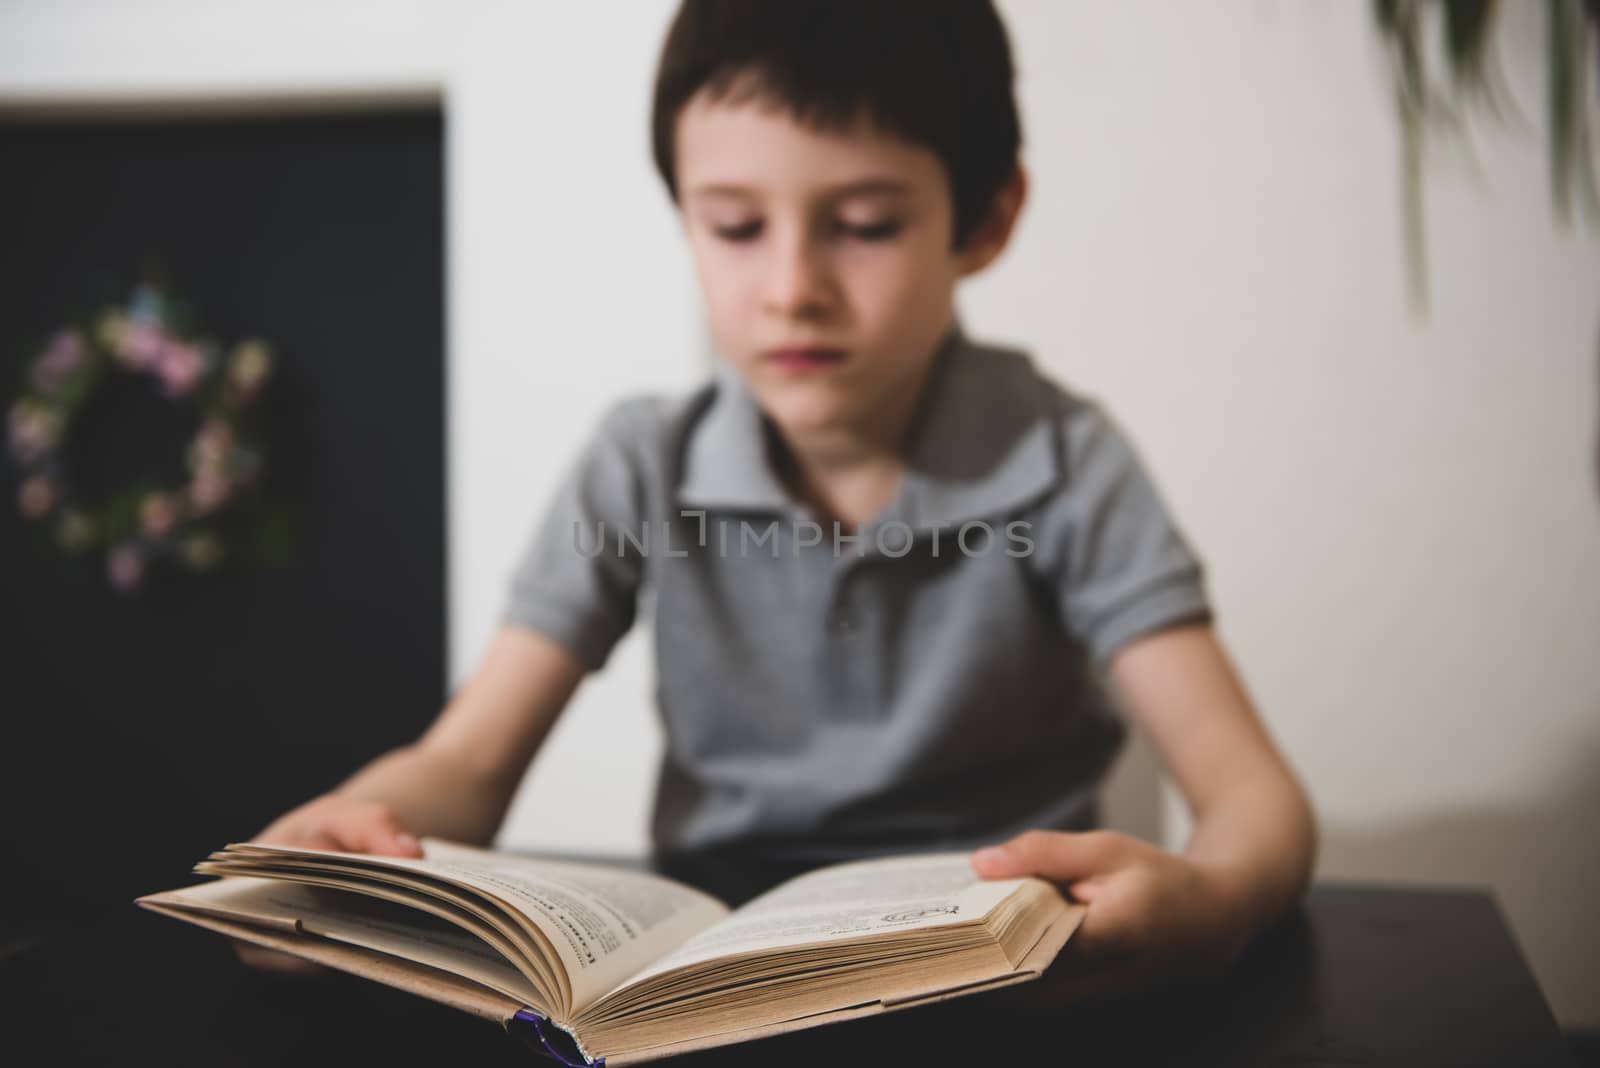 Blur image of a boy reading a book